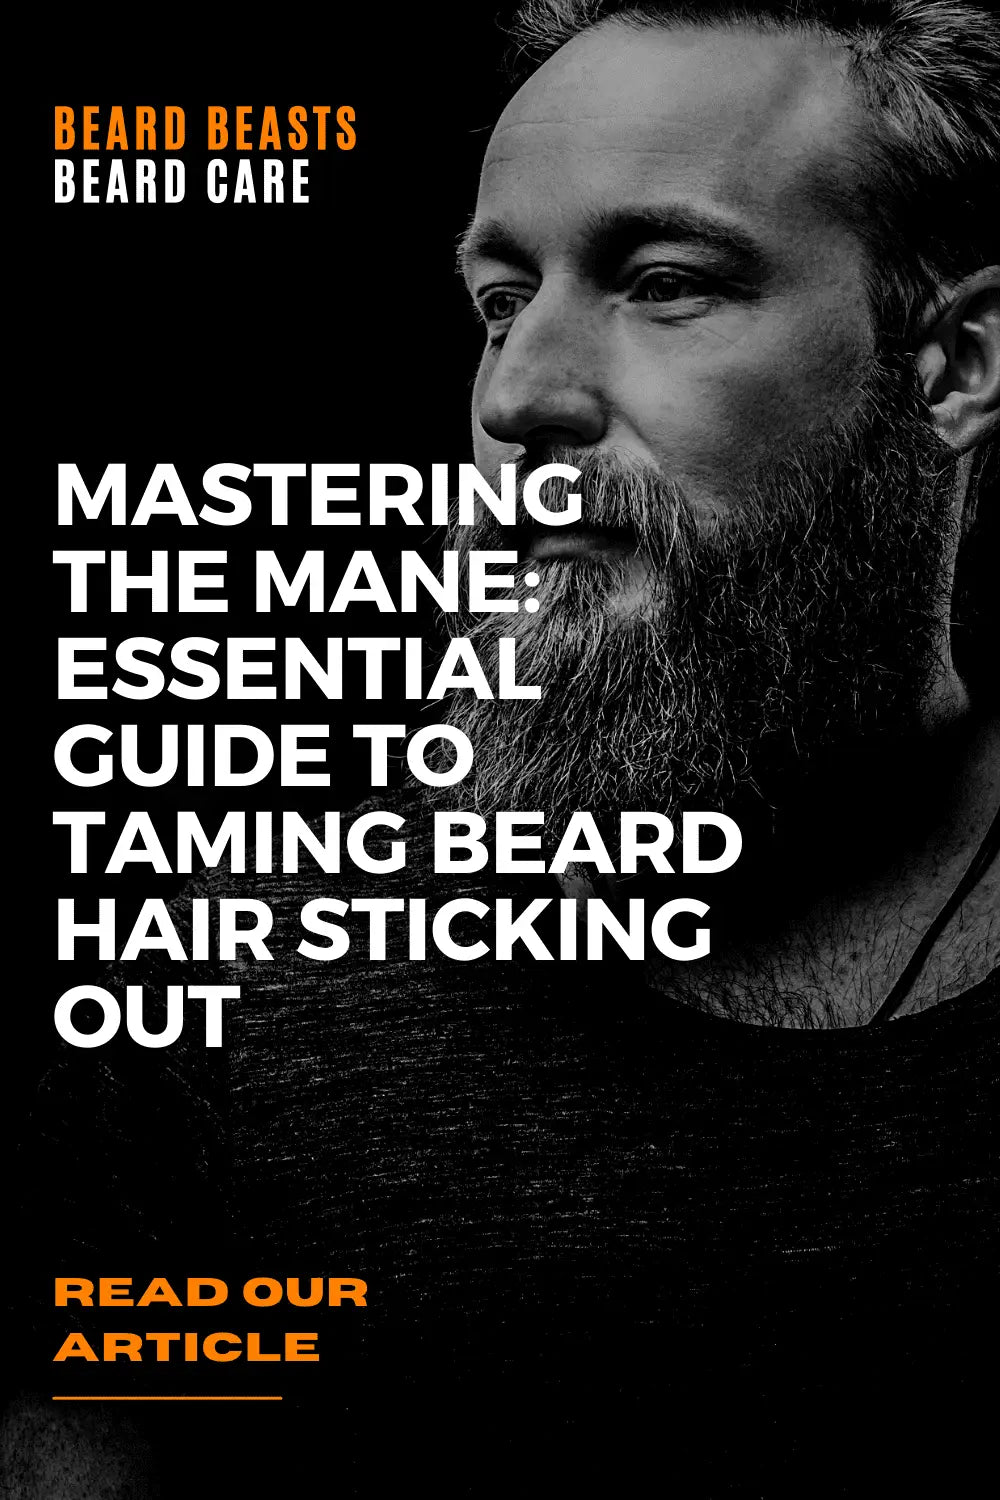 a pinterest pin promoting our article Mastering the Mane: Essential Guide to Taming Beard Hair Sticking Out